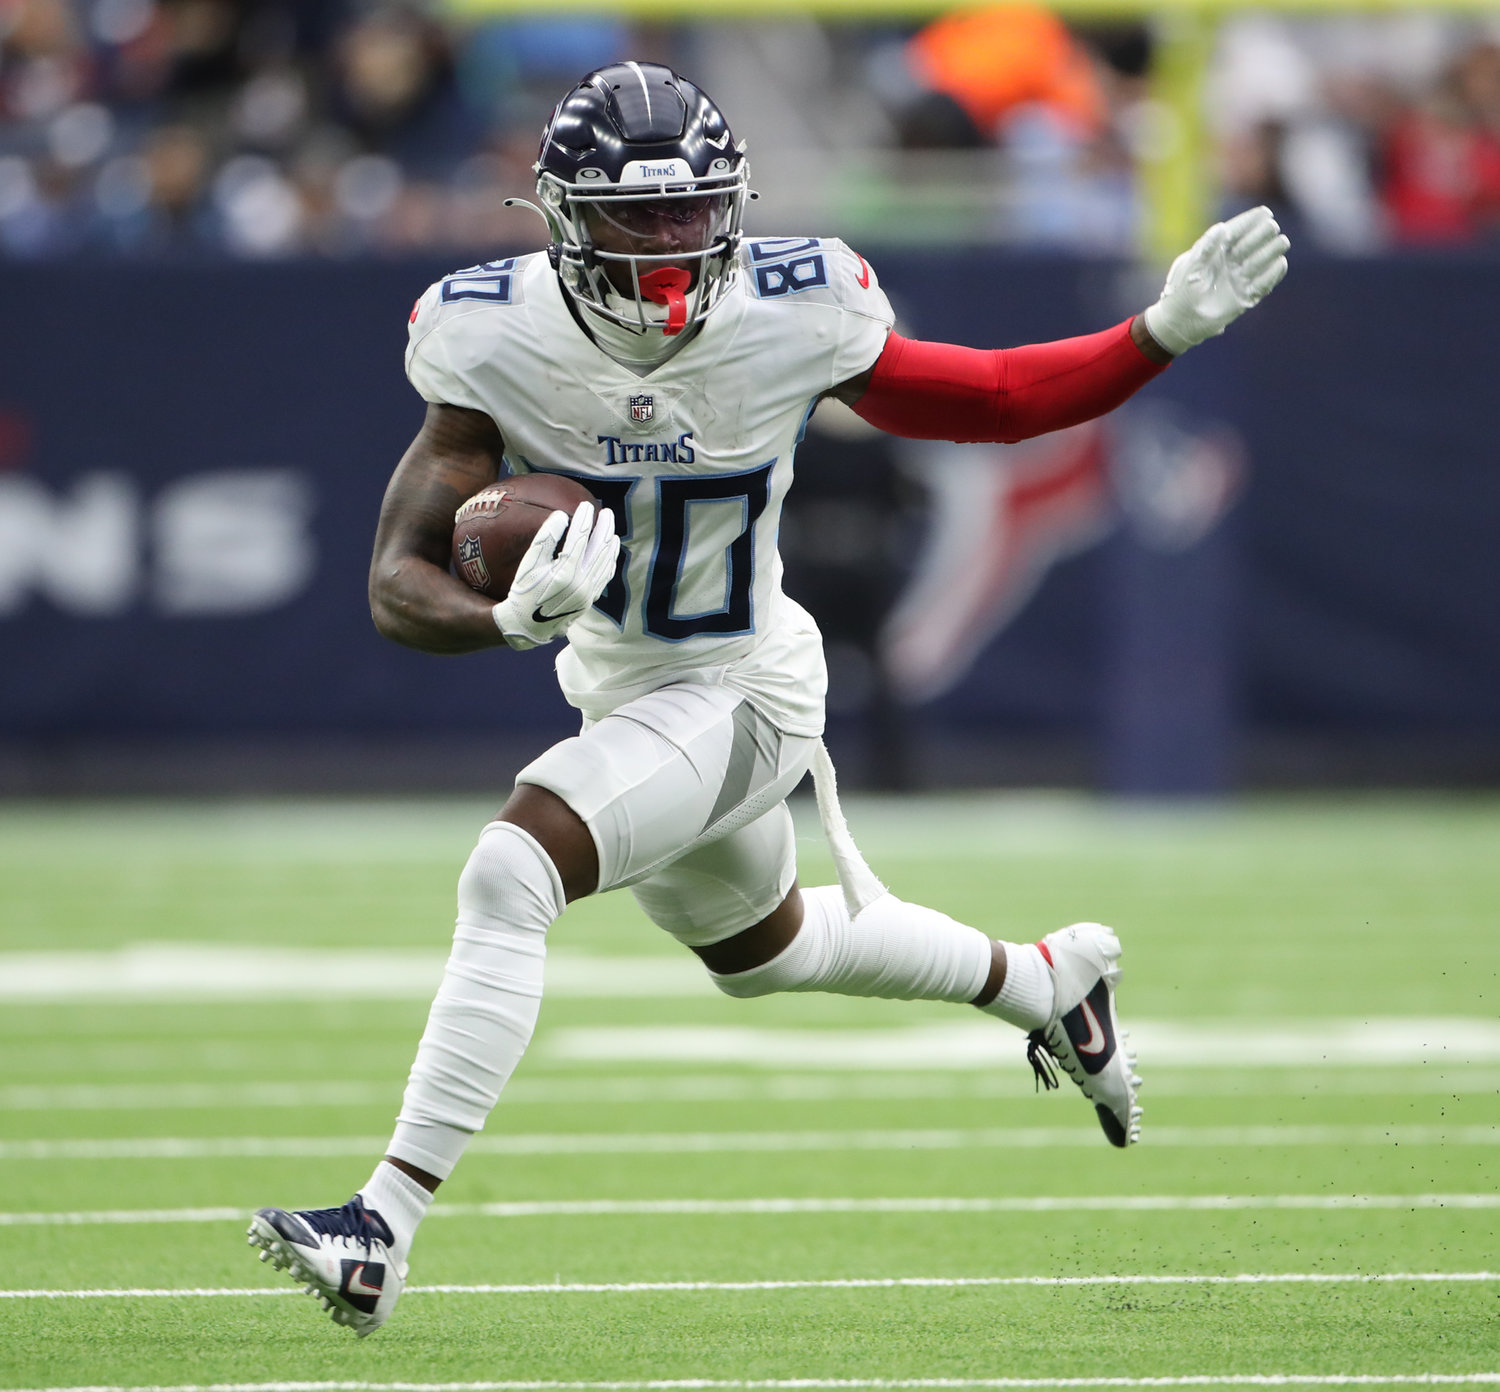 Tennessee Titans wide receiver Chester Rogers (80) carries the ball during an NFL game between the Texans and the Titans on Jan. 9, 2022 in Houston, Texas.